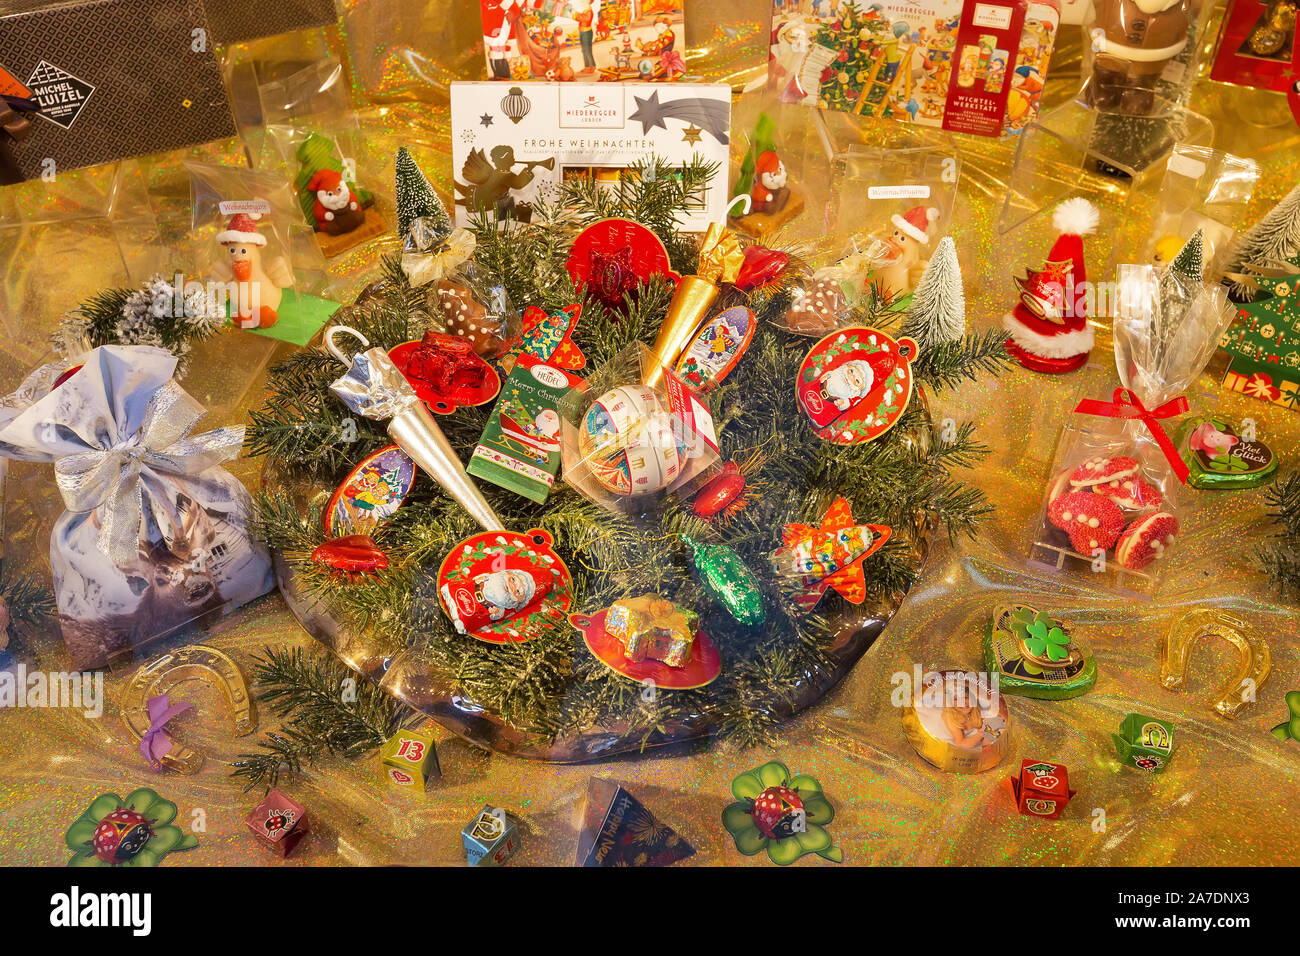 Salzburg, Austria - December 25, 2016: Christmas sweets assortment in traditional store Stock Photo